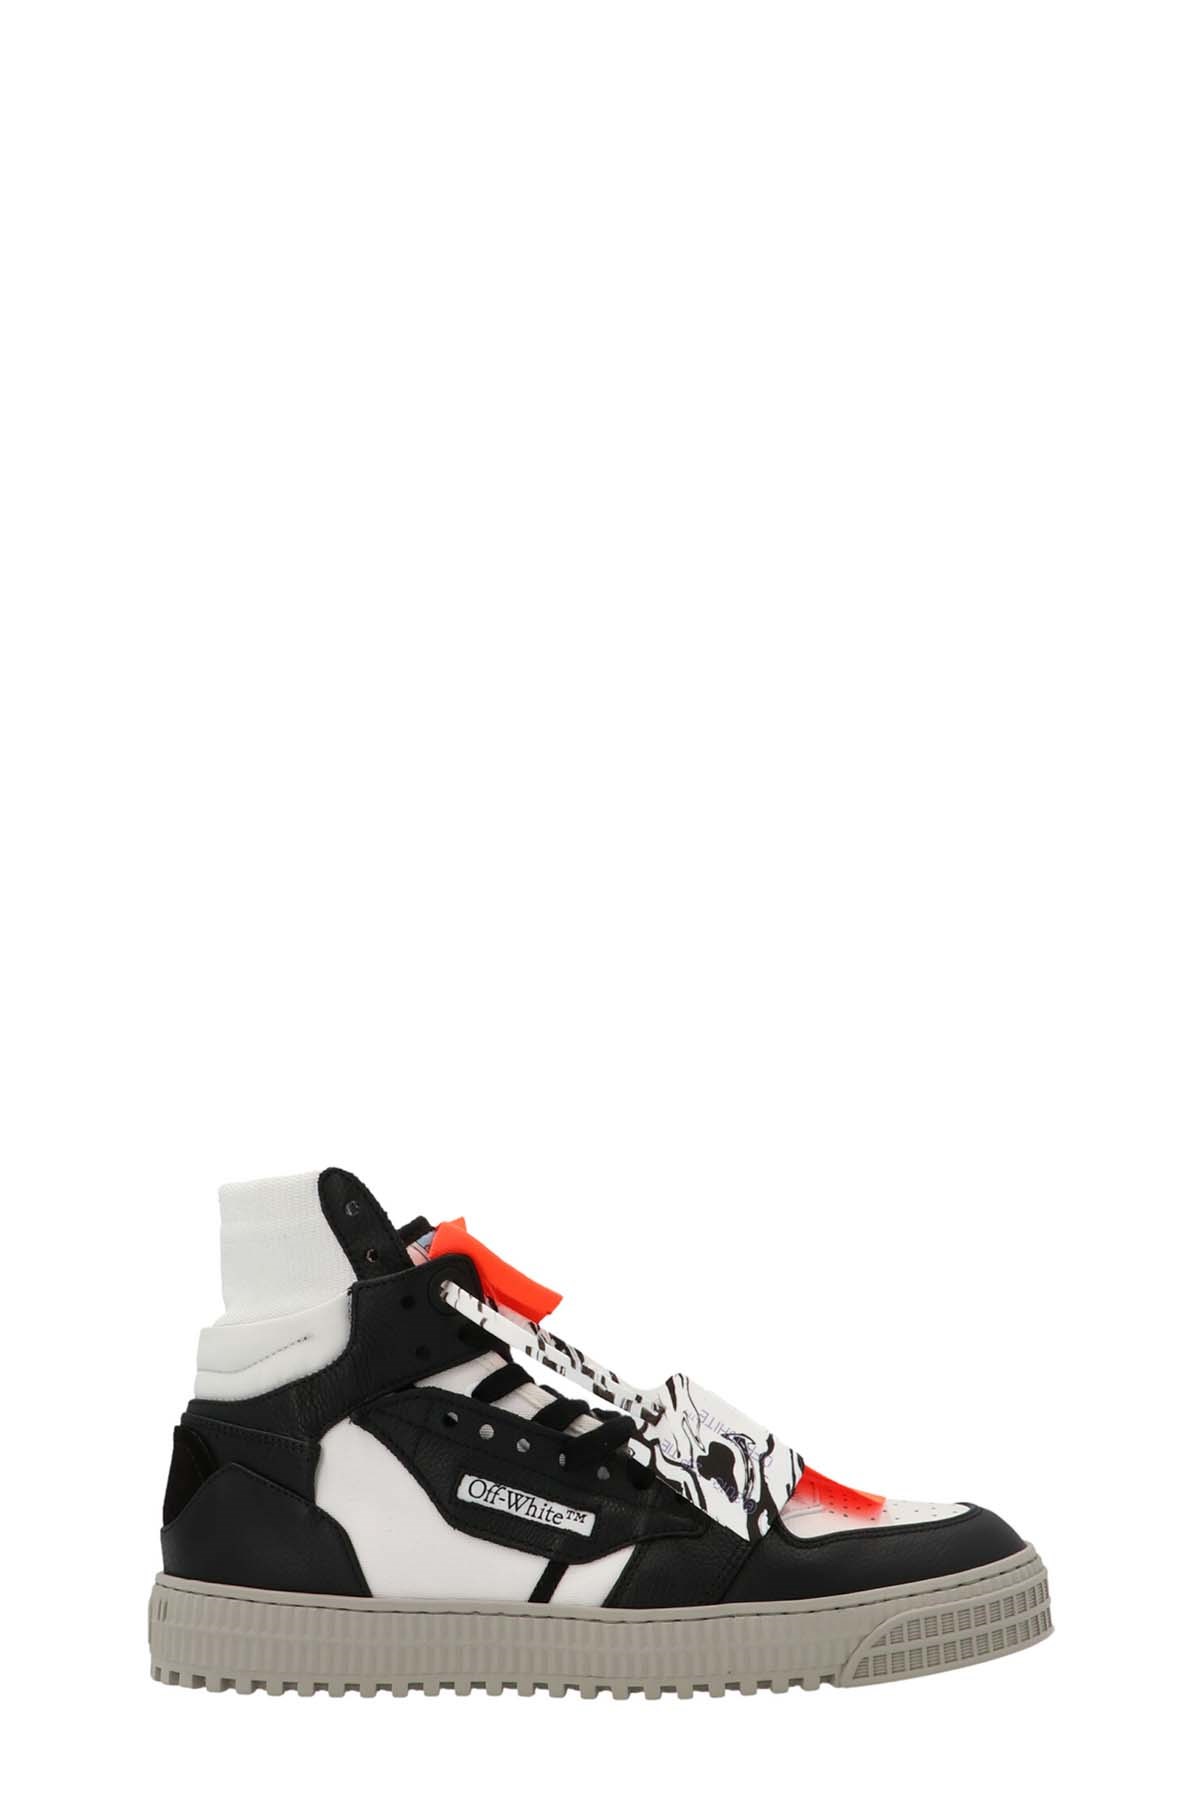 OFF-WHITE '3.0 Off Court' Sneakers